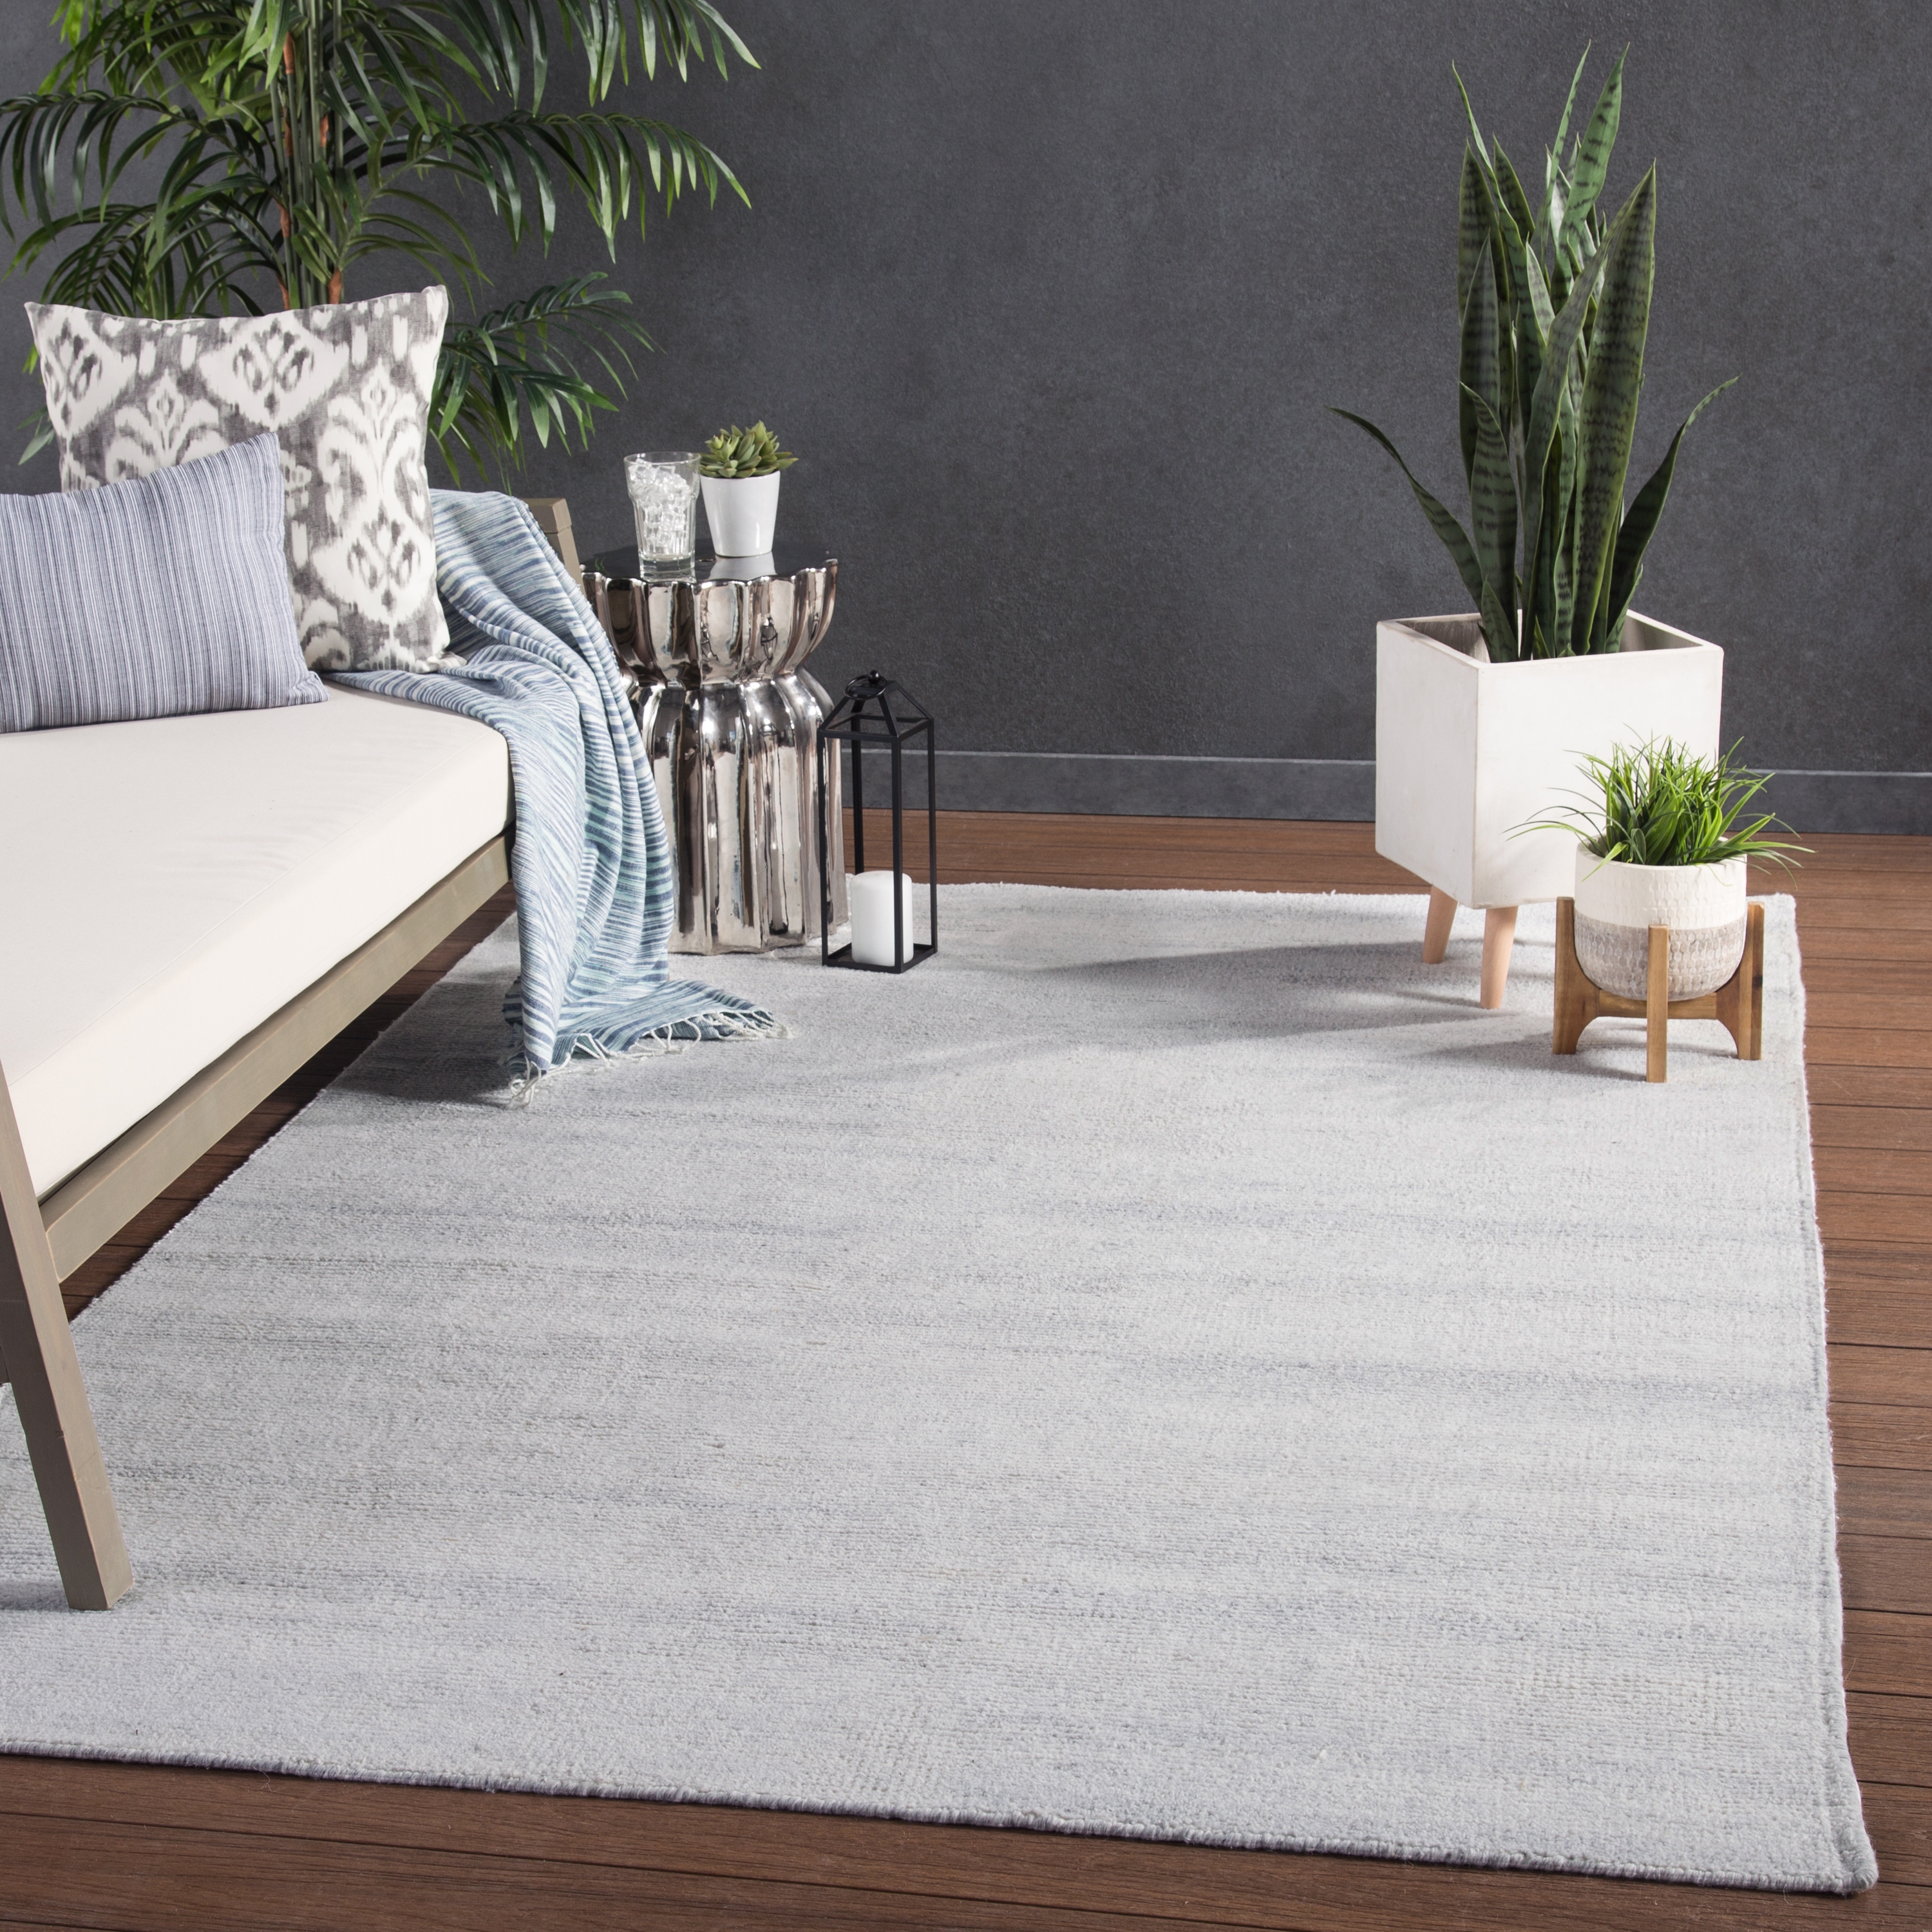 Limon Indoor/ Outdoor Solid White Area Rug. 7'10" X 10'10" - Image 4